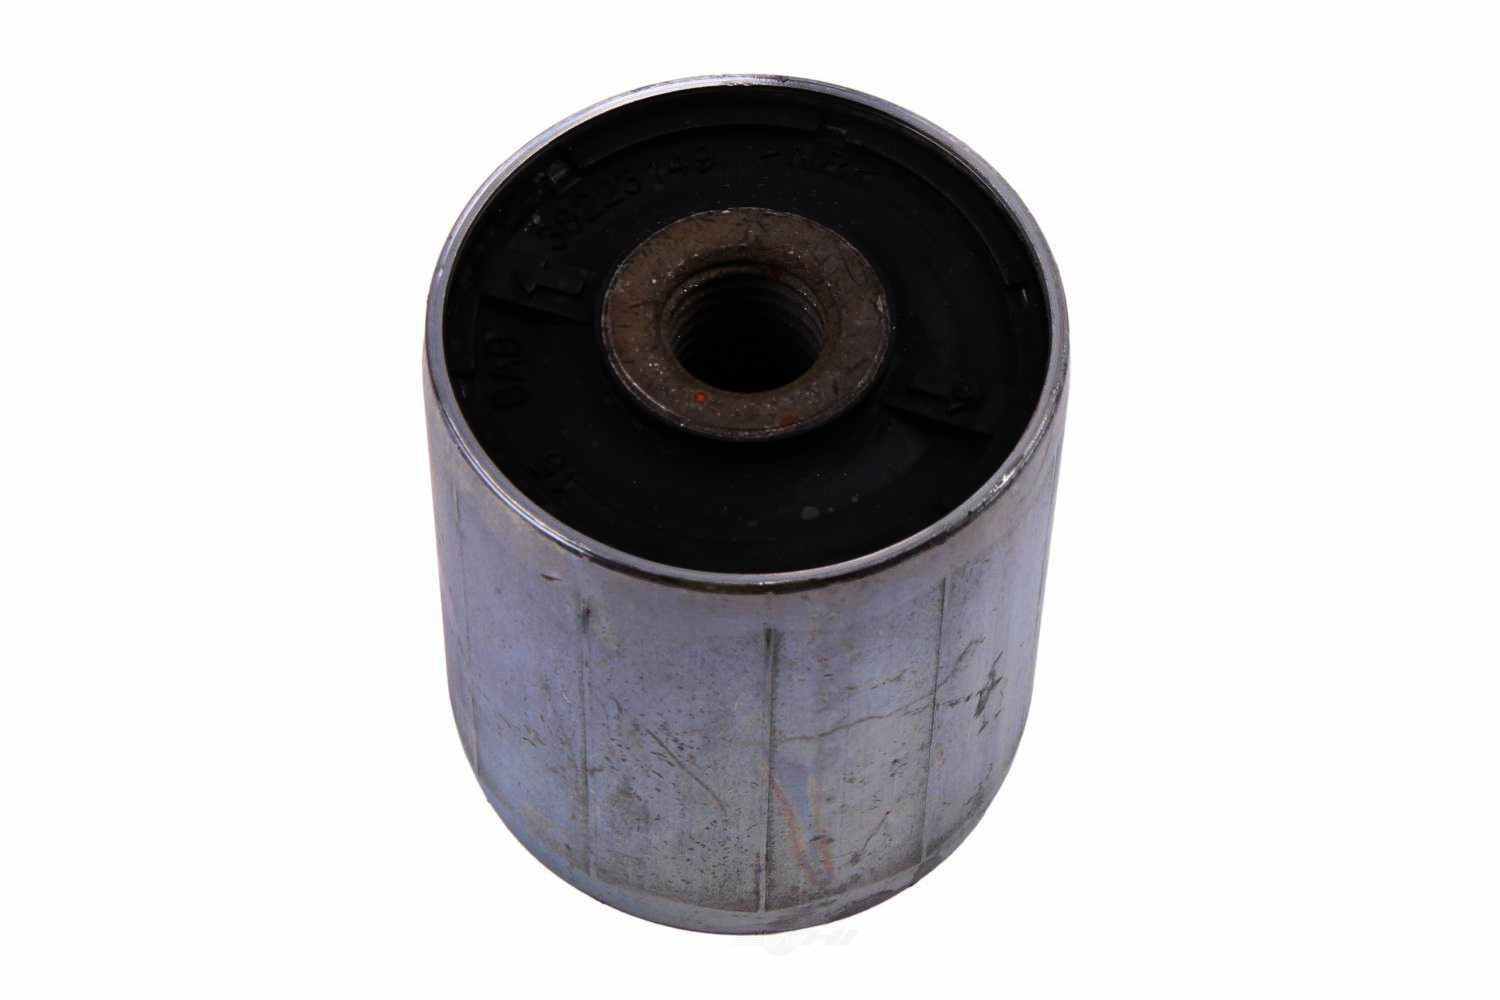 GM GENUINE PARTS - Rack and Pinion Mount Bushing - GMP 84234959